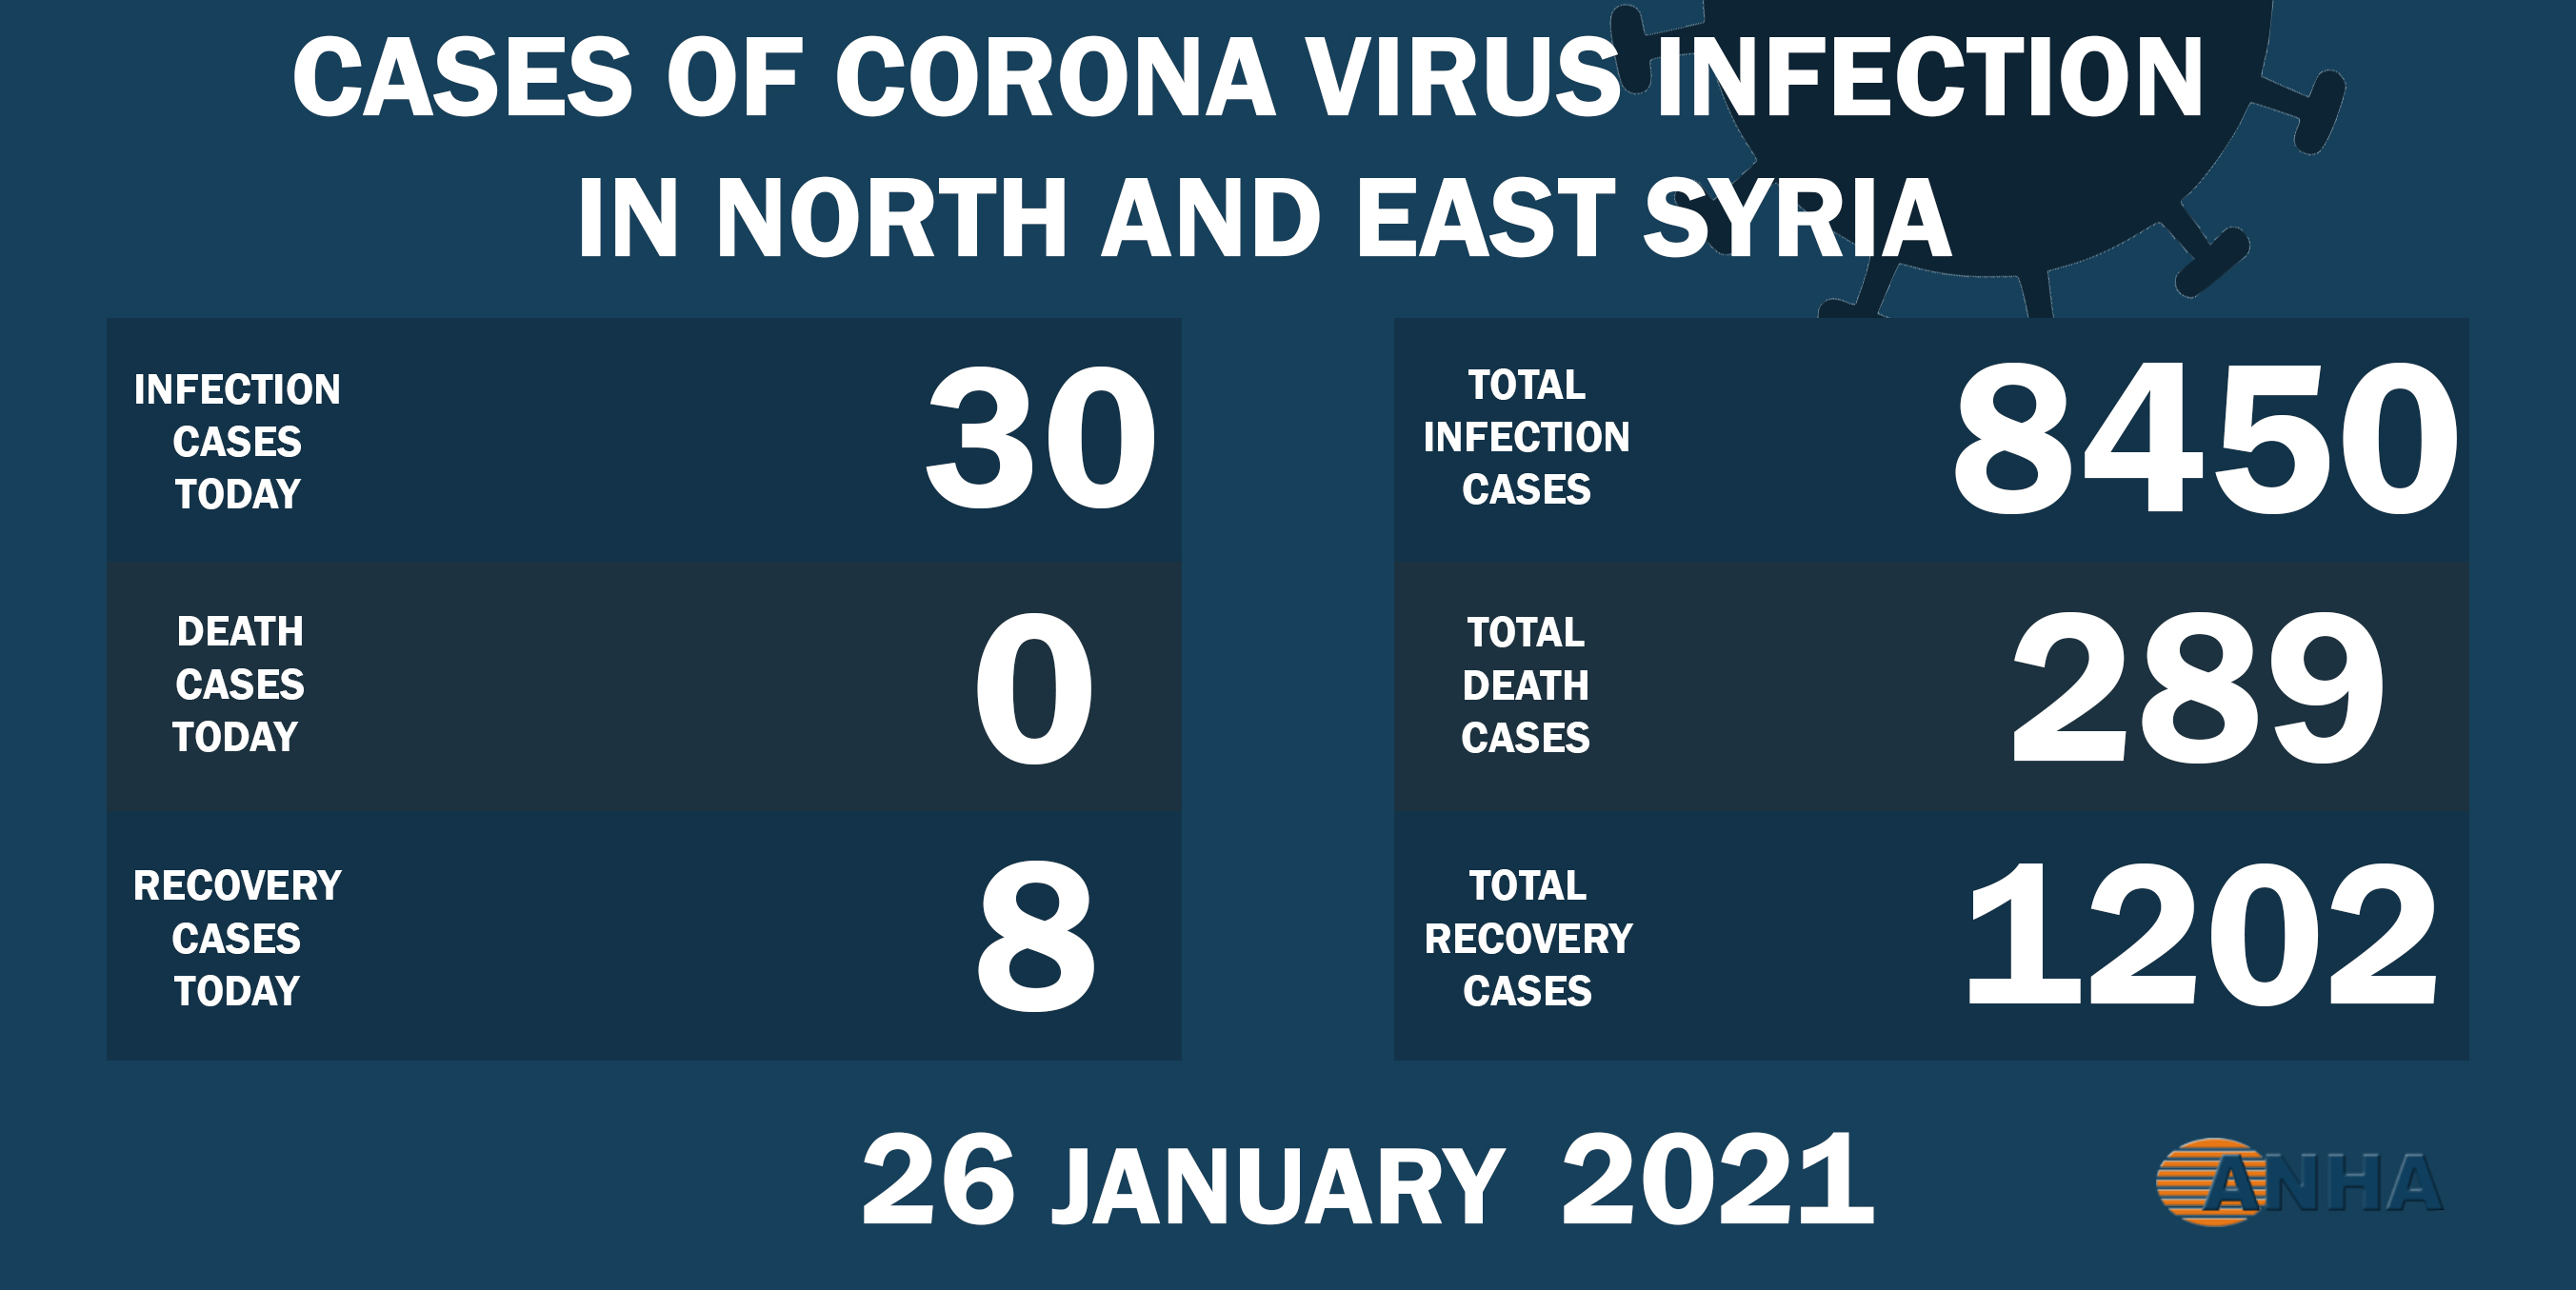 30 new cases by COVID-19 in NE Syria